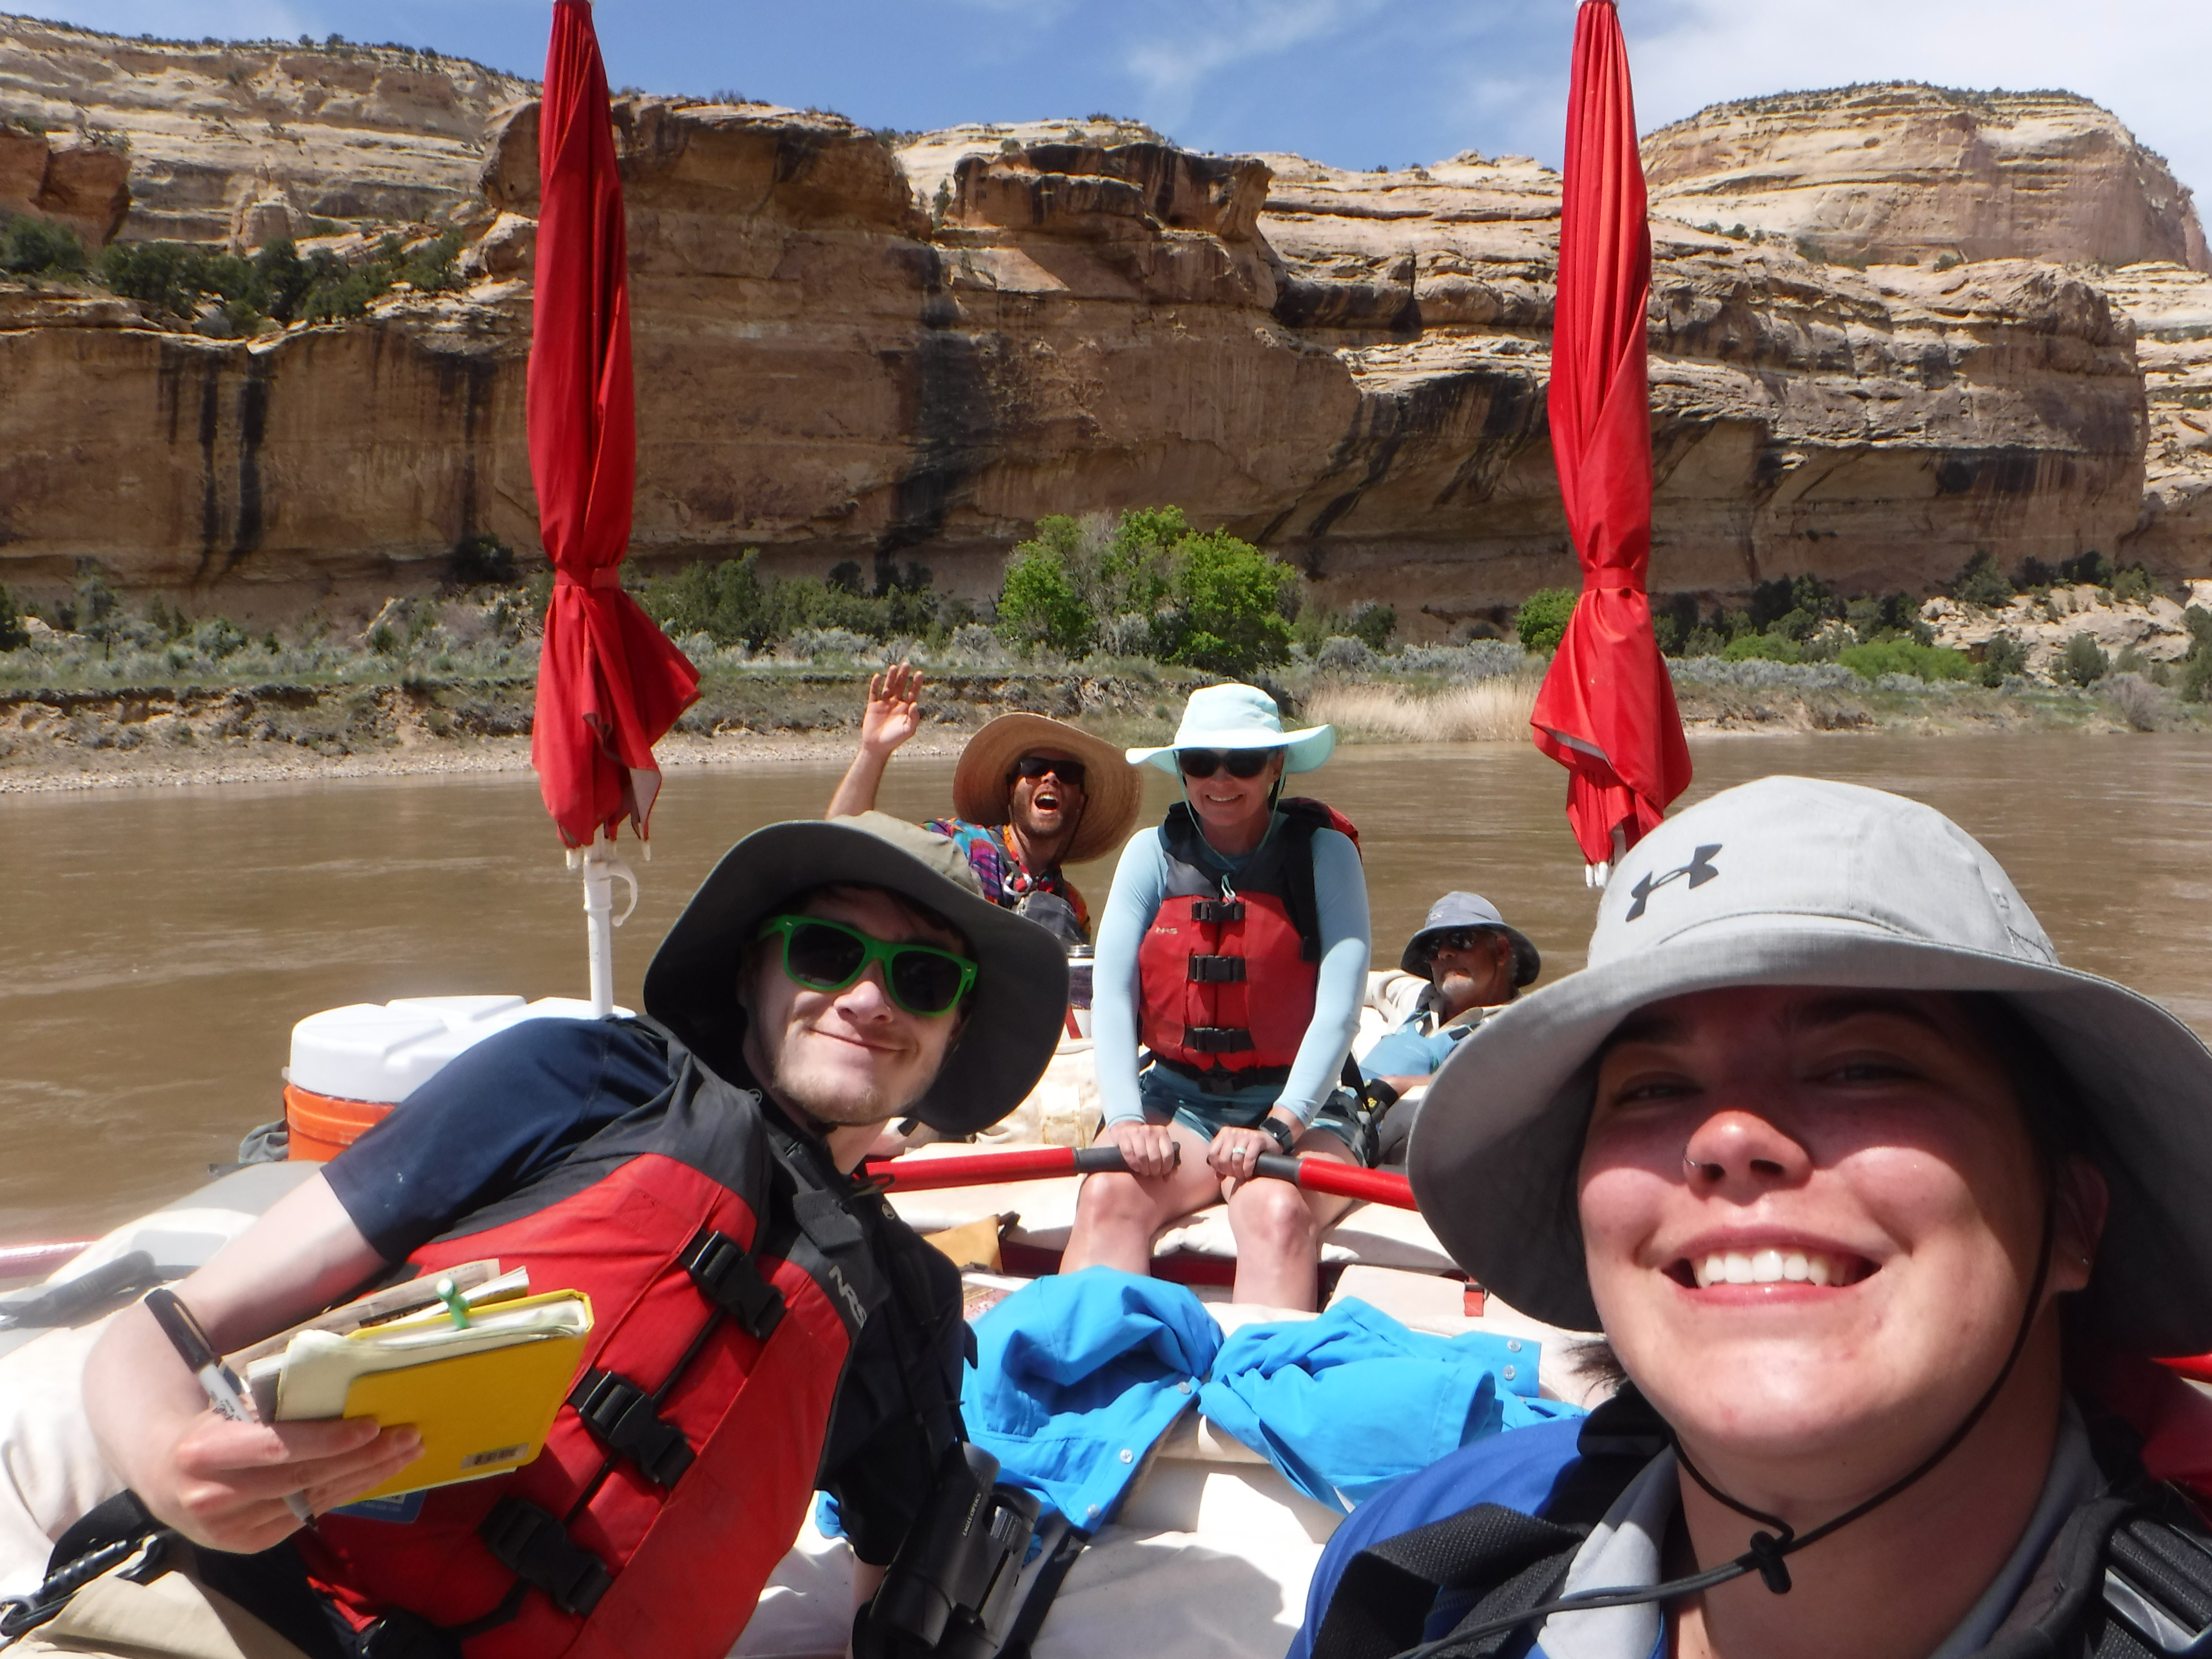 Students at UNCO were already participating in some river-based field work, and the certificate program will build upon those experiences with its interdisciplinary framework and focus on river careers. Photo by Sharon Bywater-Reyes.